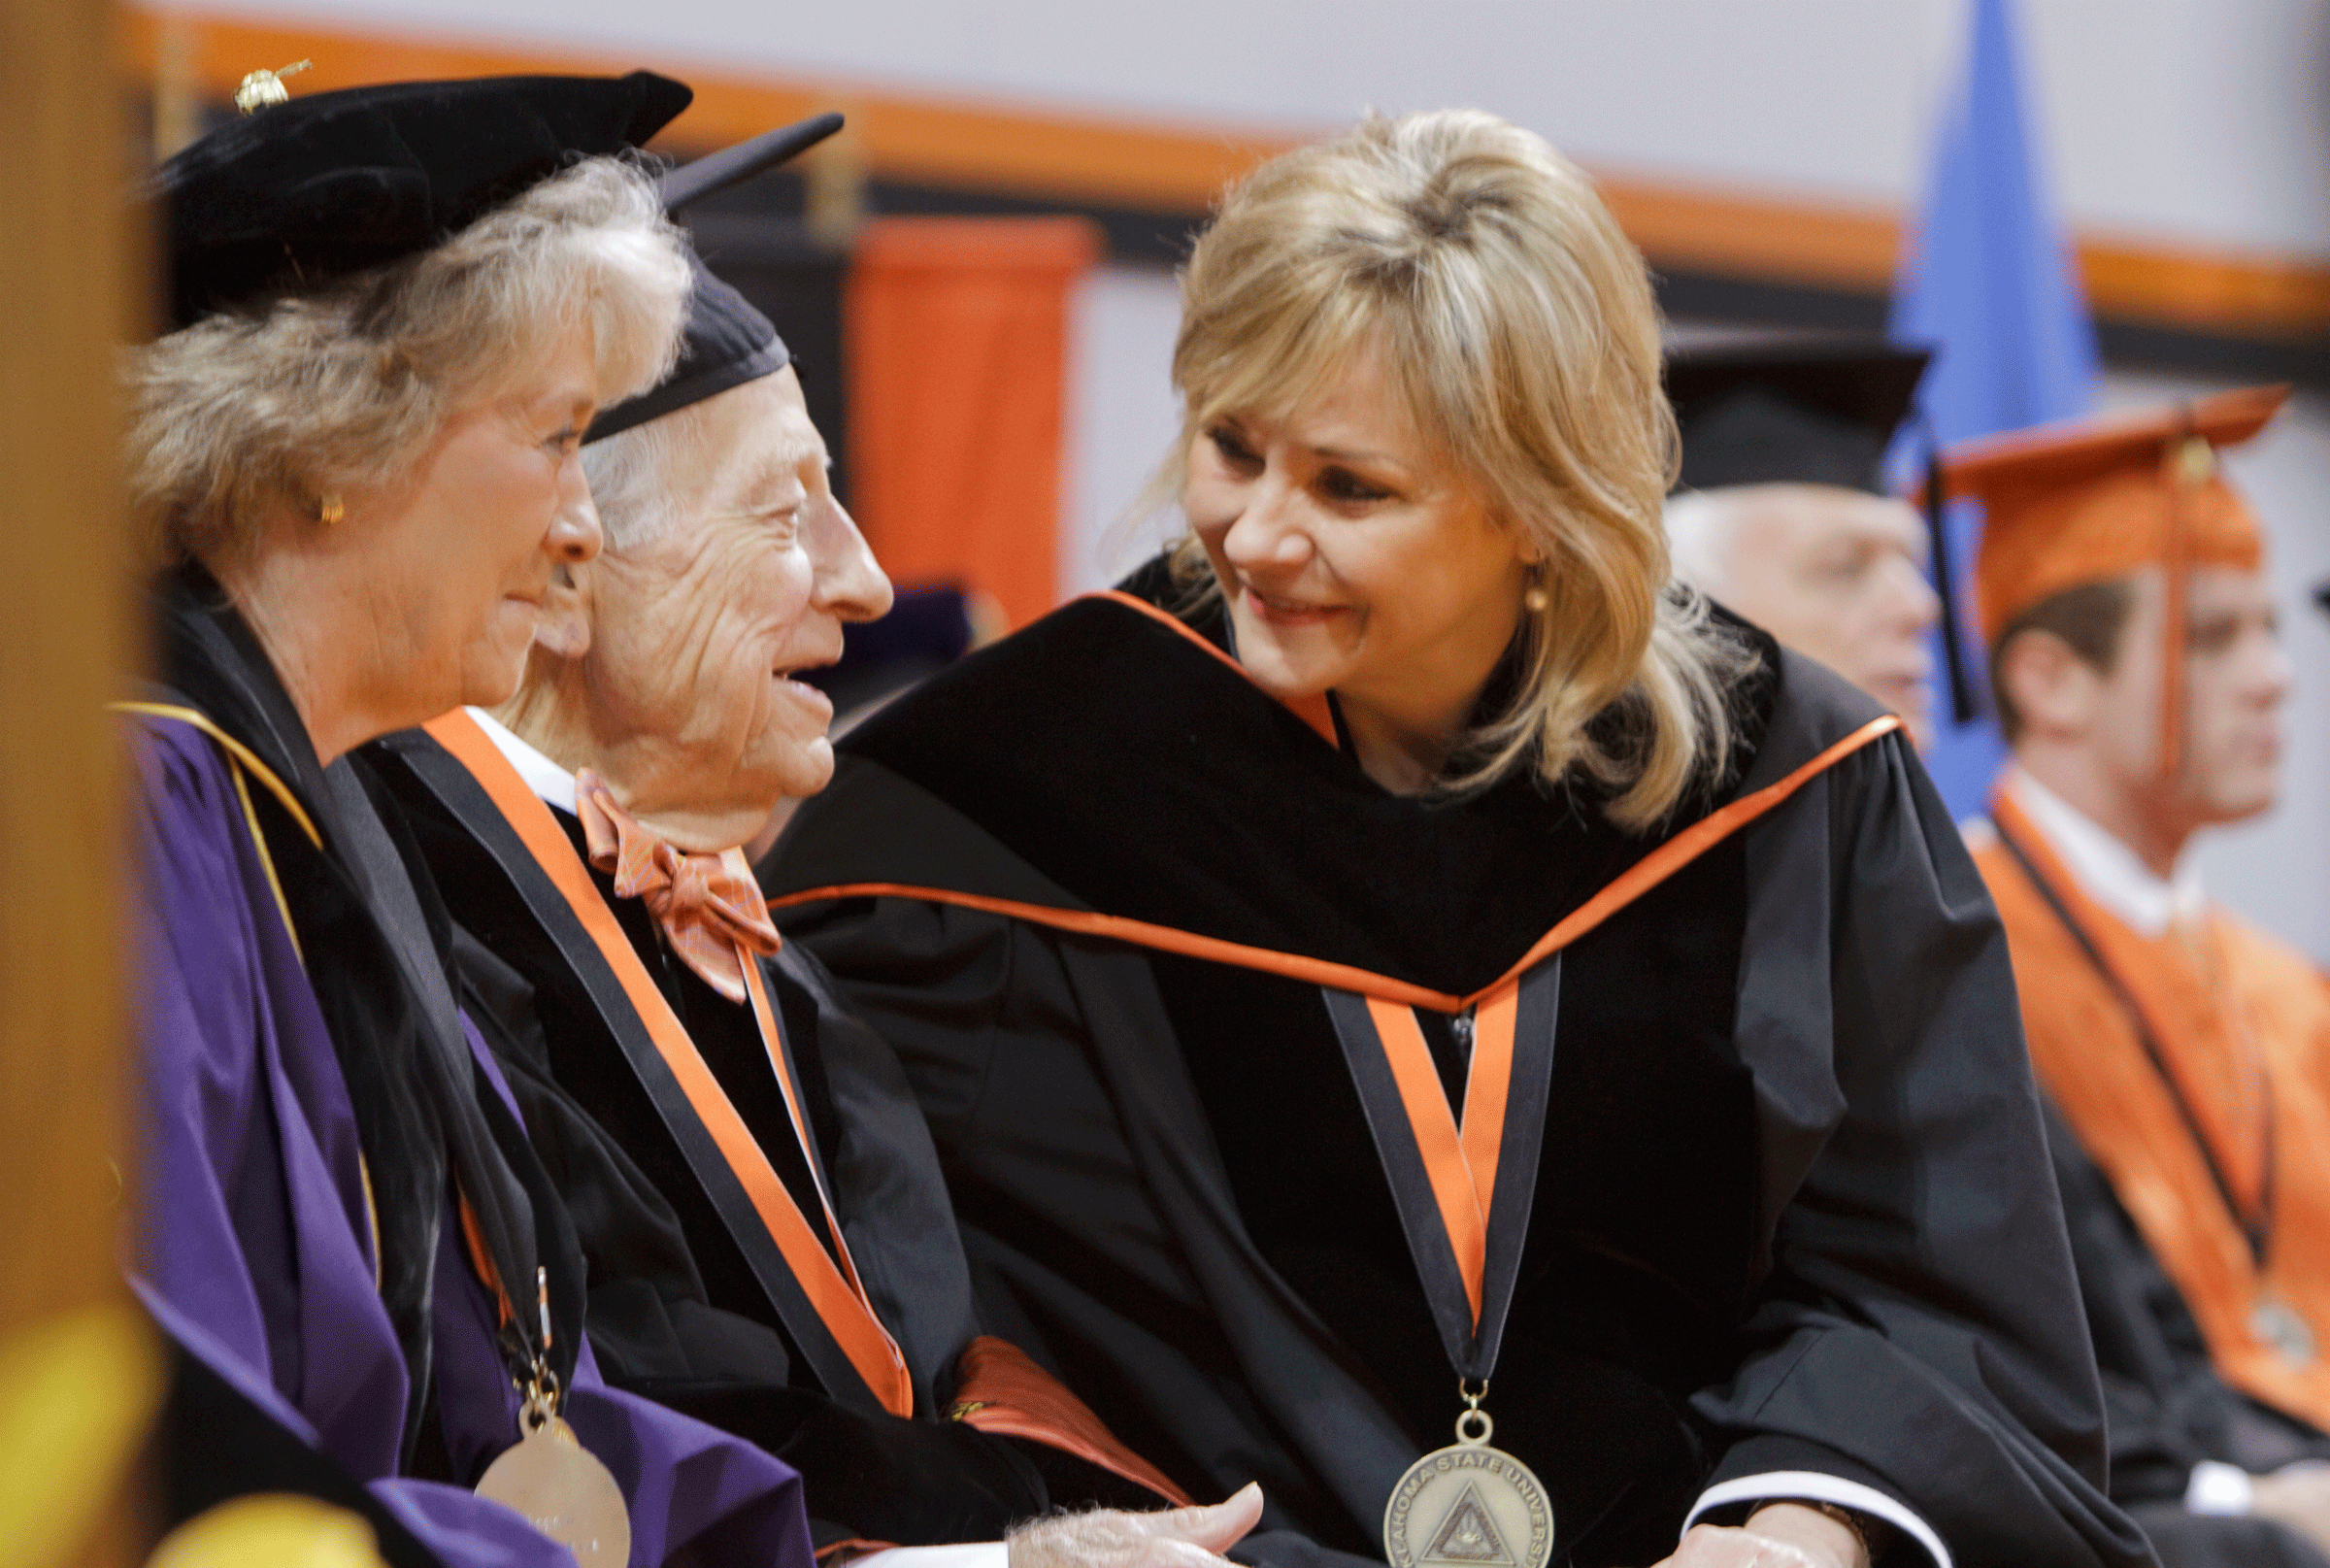 Oklahoma State University Commencement speaker, Oklahoma Governor Mary Fallin, speaks with Hubert Gragg who received his honorary doctorates degree during Saturday’s ceremonies.